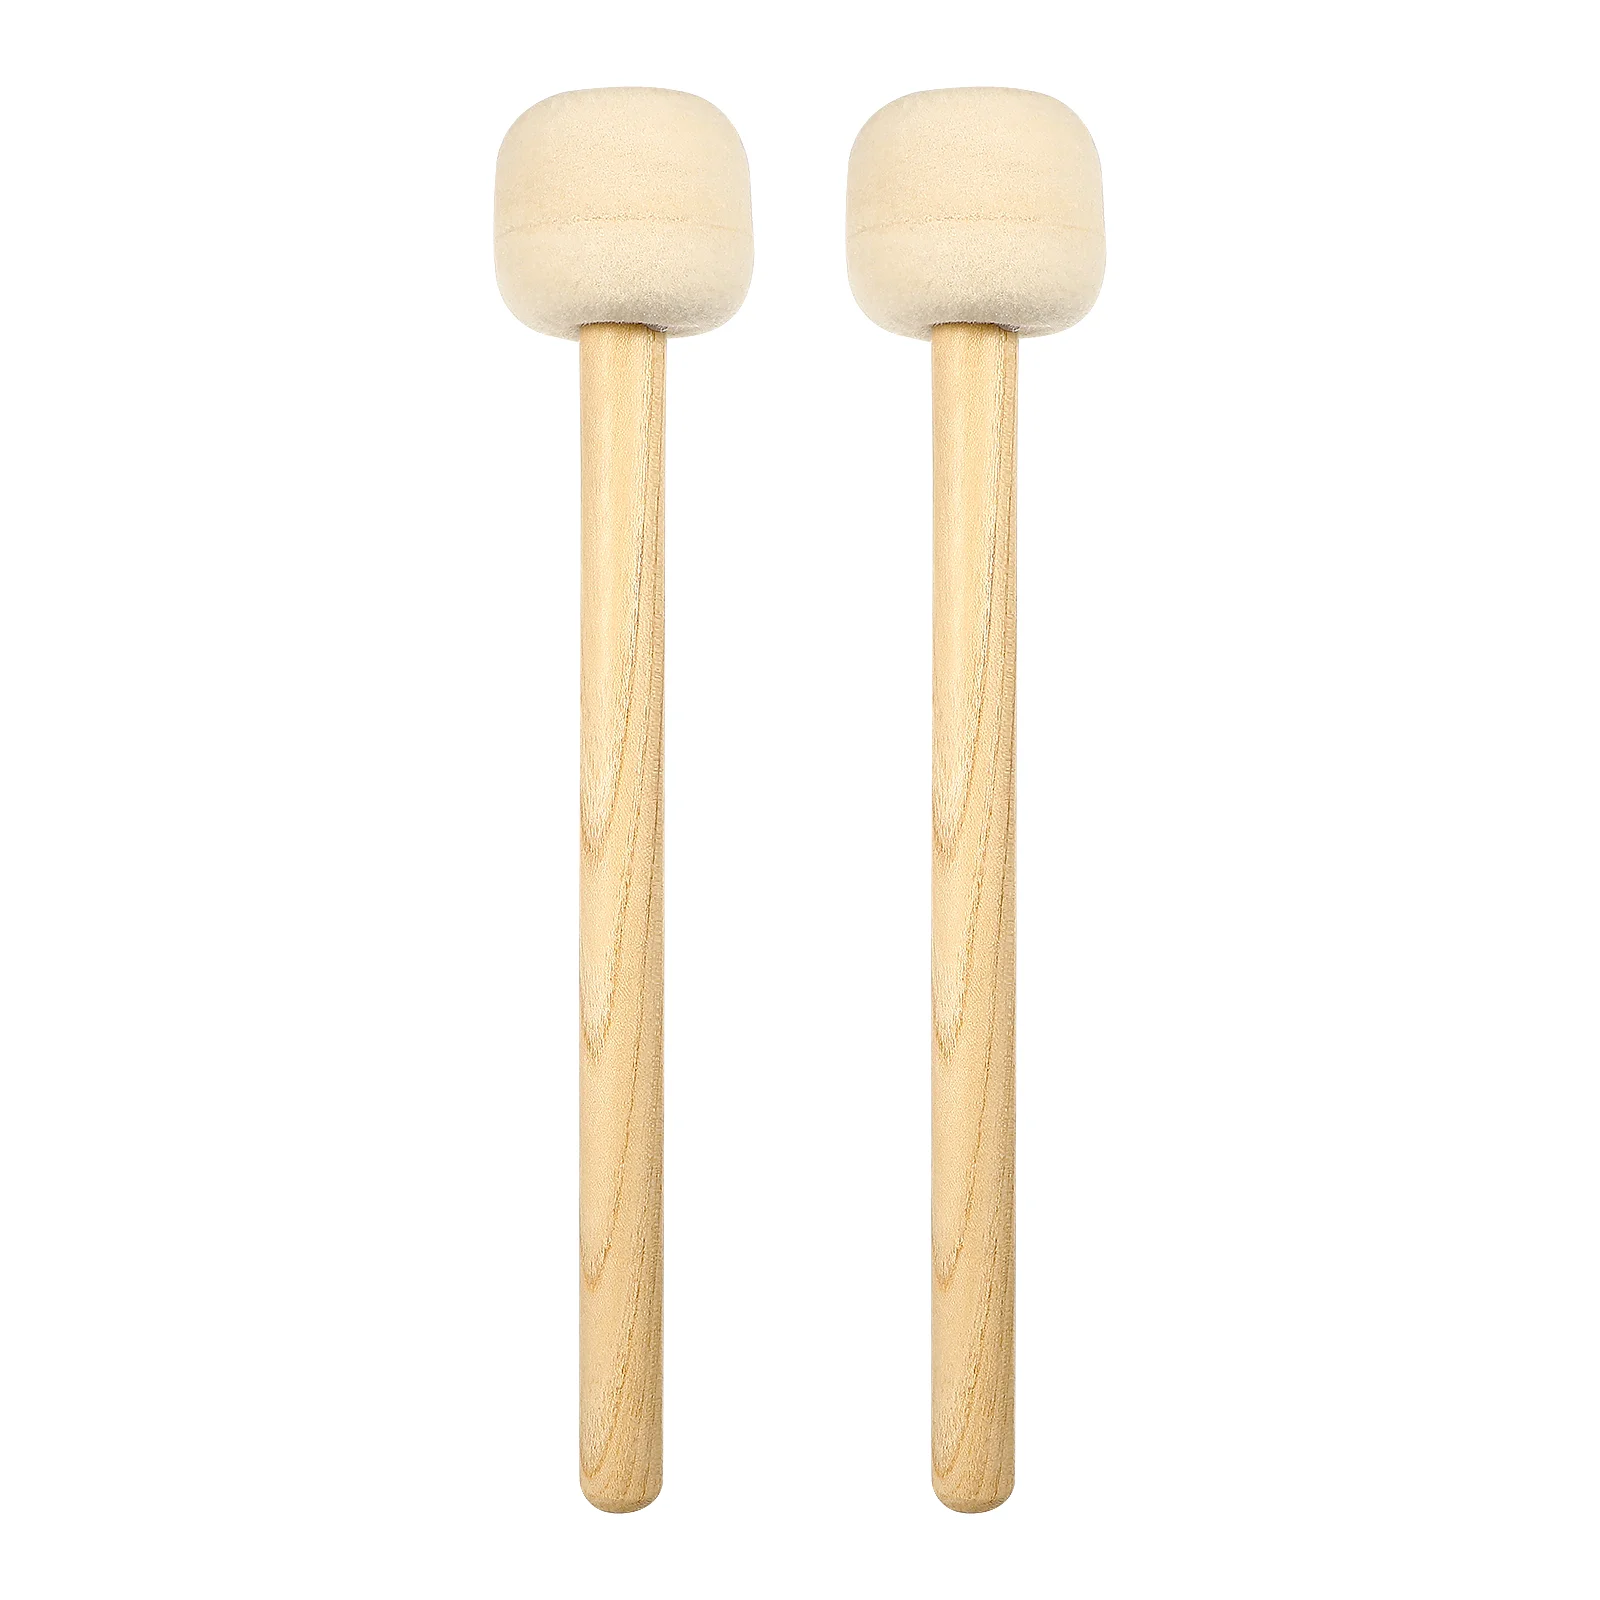 

Drum Mallets Bass Felt Beater Head Sticks Drumsticks Timpani Marching Pedal Mallet Xylophone Percussion Instrument 7A Xylophones